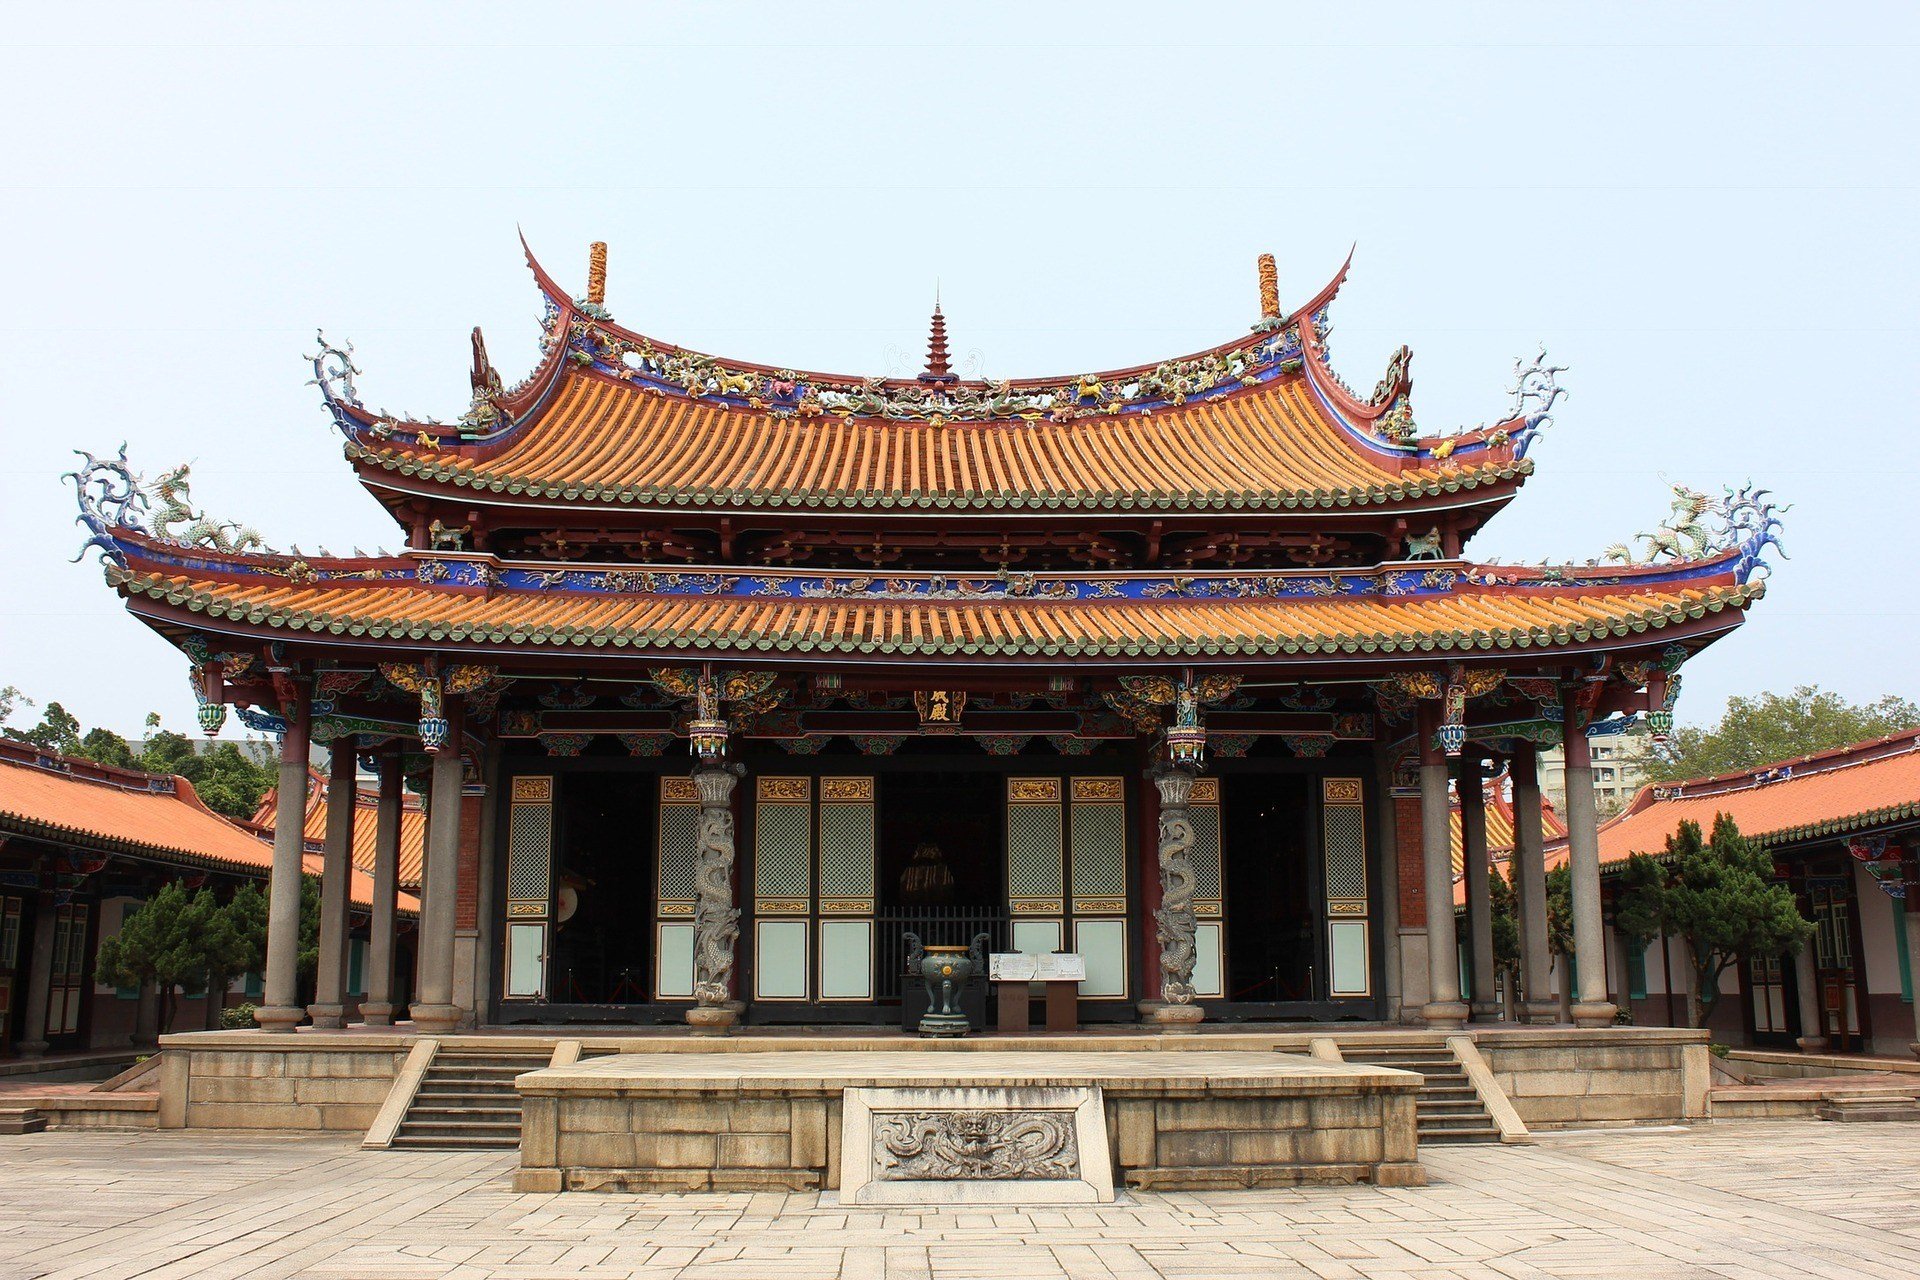 Another temple attraction on the Taipei itinerary